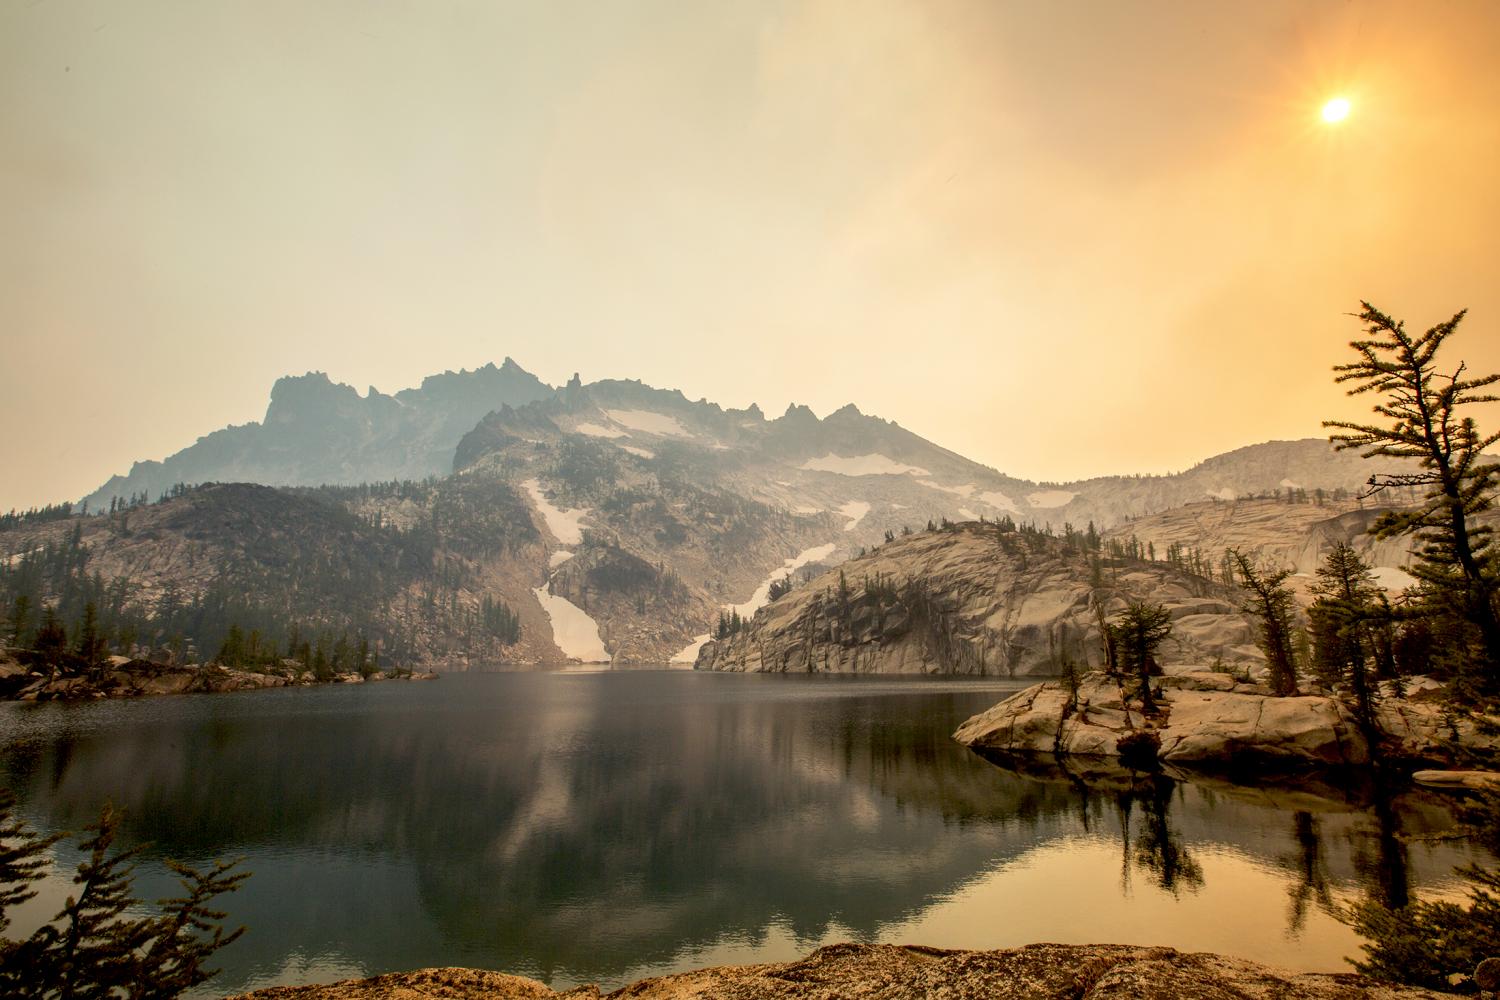 Washingtons Enchantments this Labor Day weekend as wildfires burned nearby.